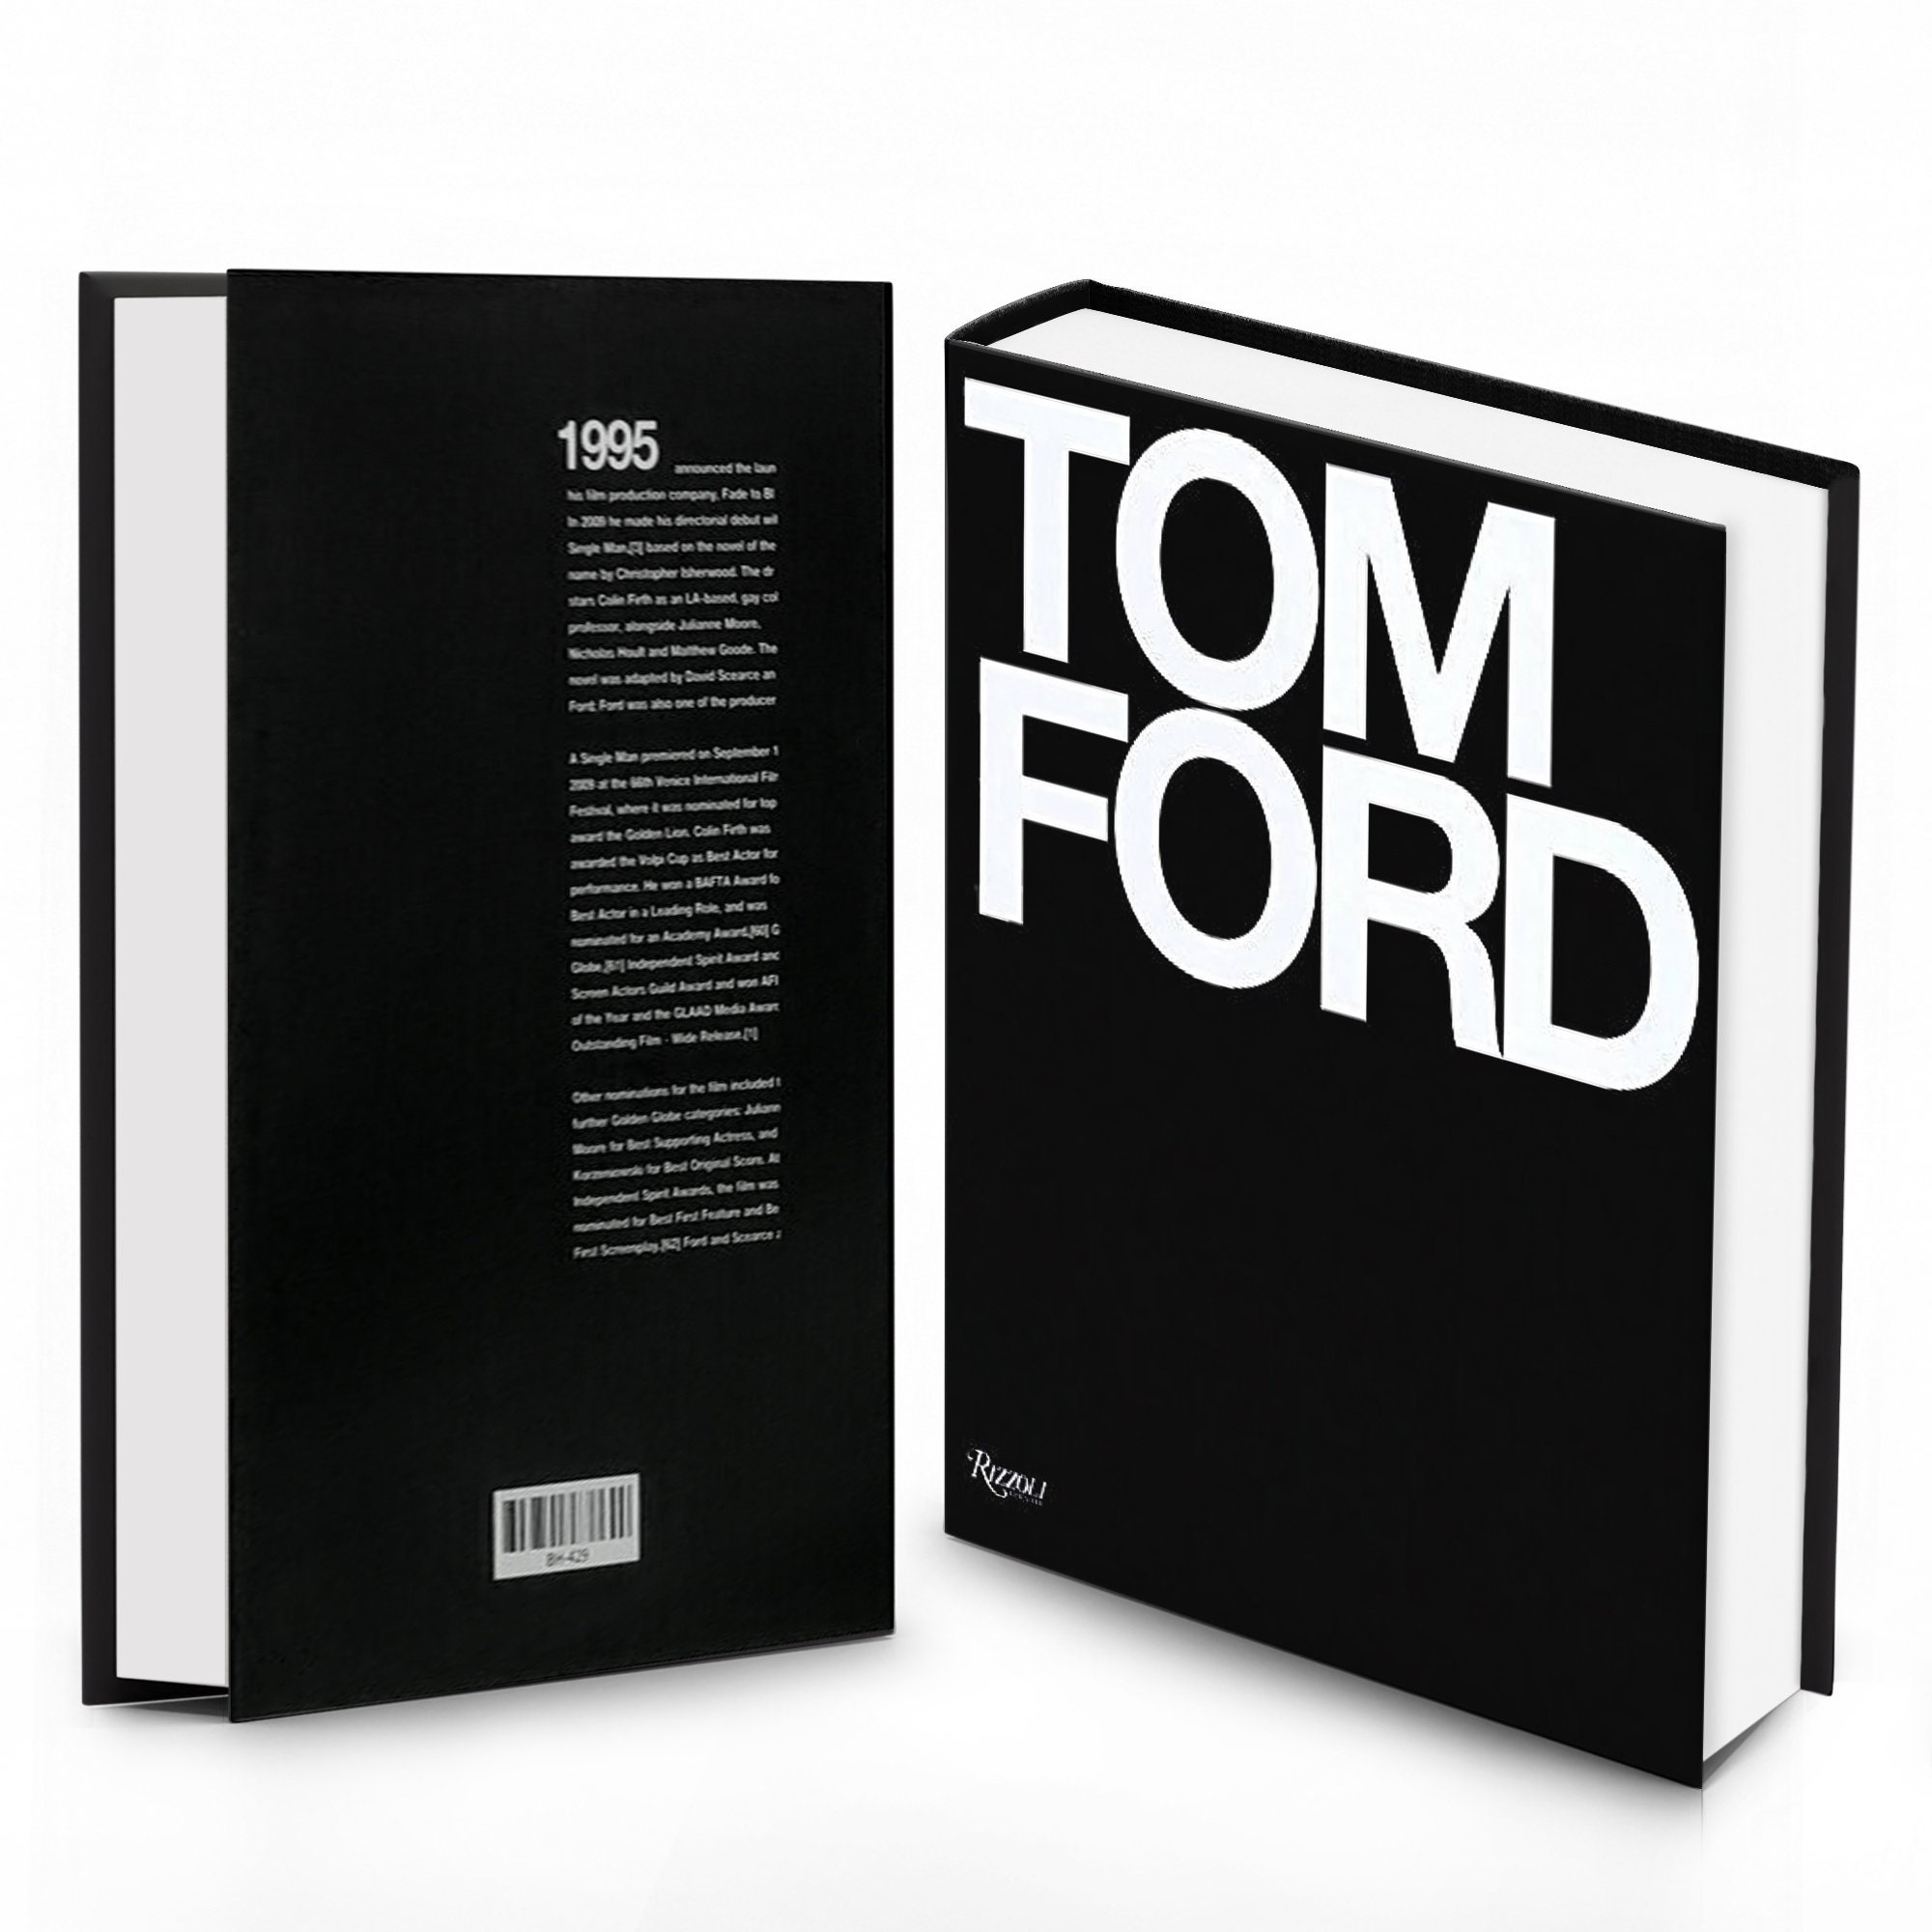 HOUSE UPDATES, I ruined my Tom Ford book